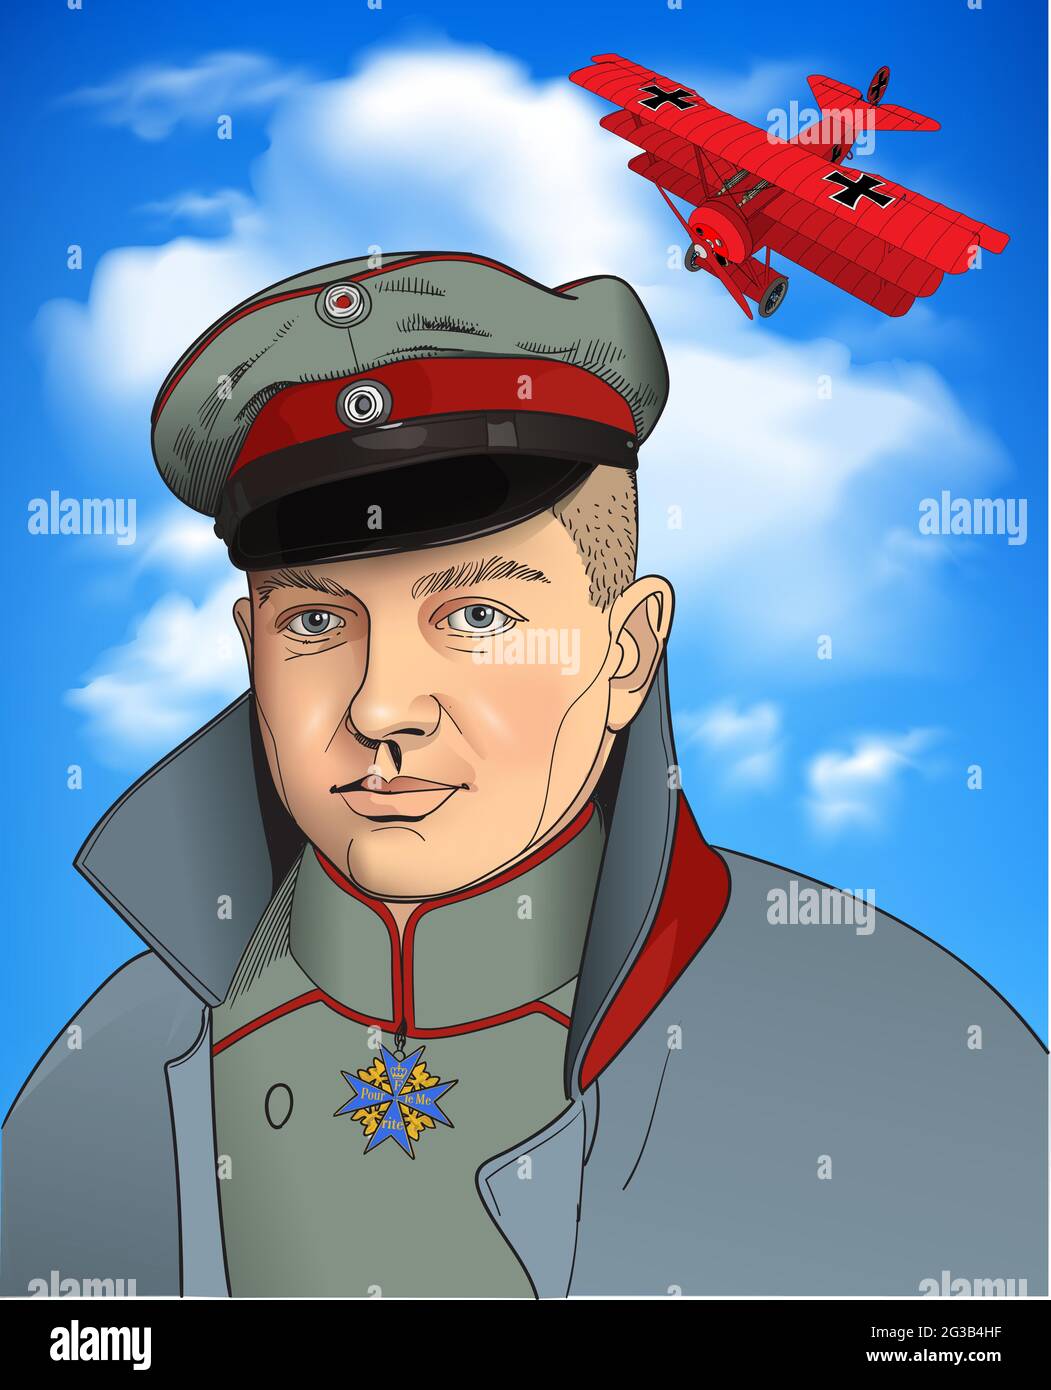 Manfred Albrecht Freiherr von Richthofen, known in English as Baron von Richthofen, and most famously as the 'Red Baron', was a fighter pilot with the Stock Vector